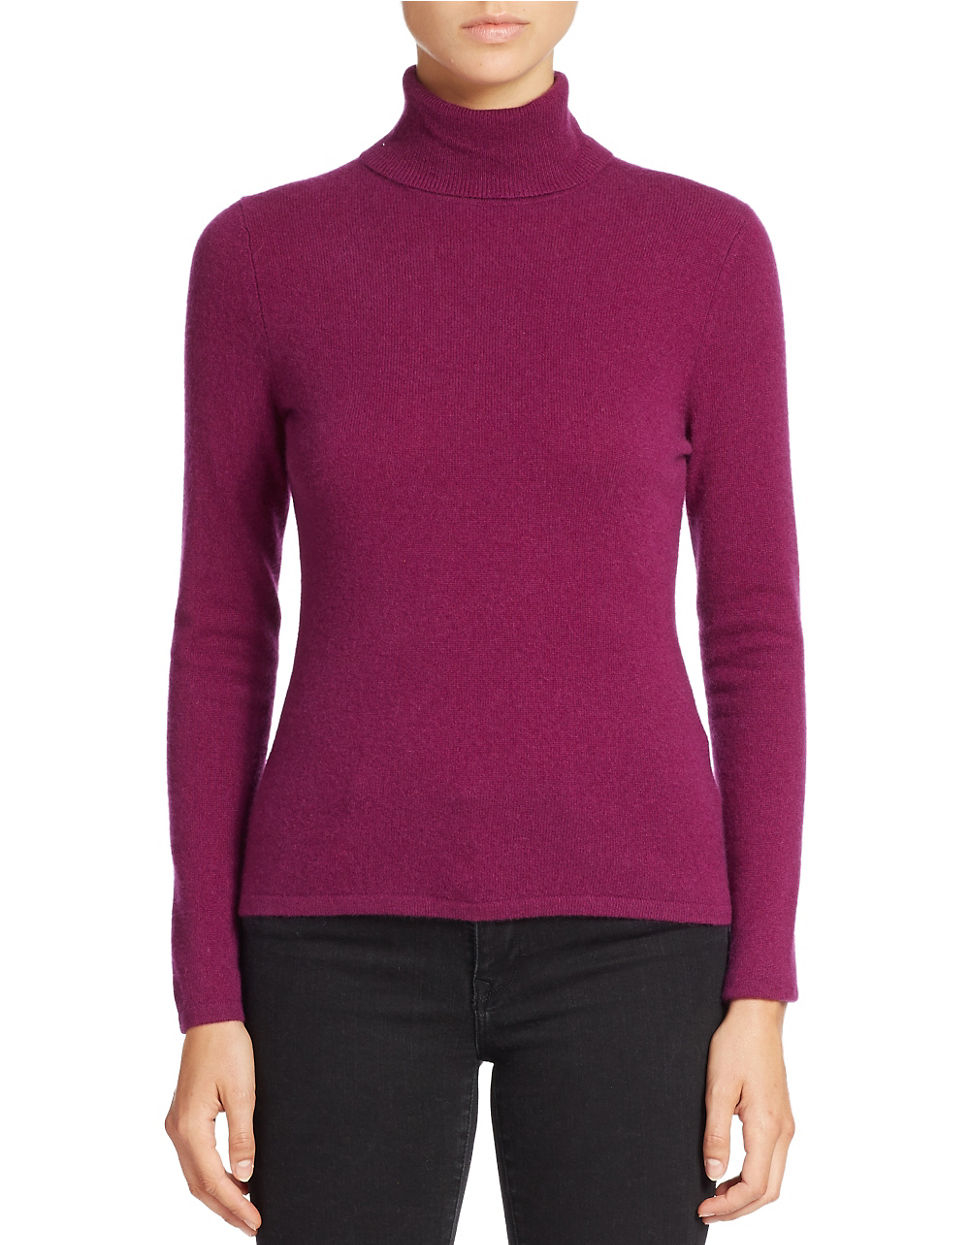 Lord & taylor Petite Cashmere Turtleneck Sweater in Purple | Lyst